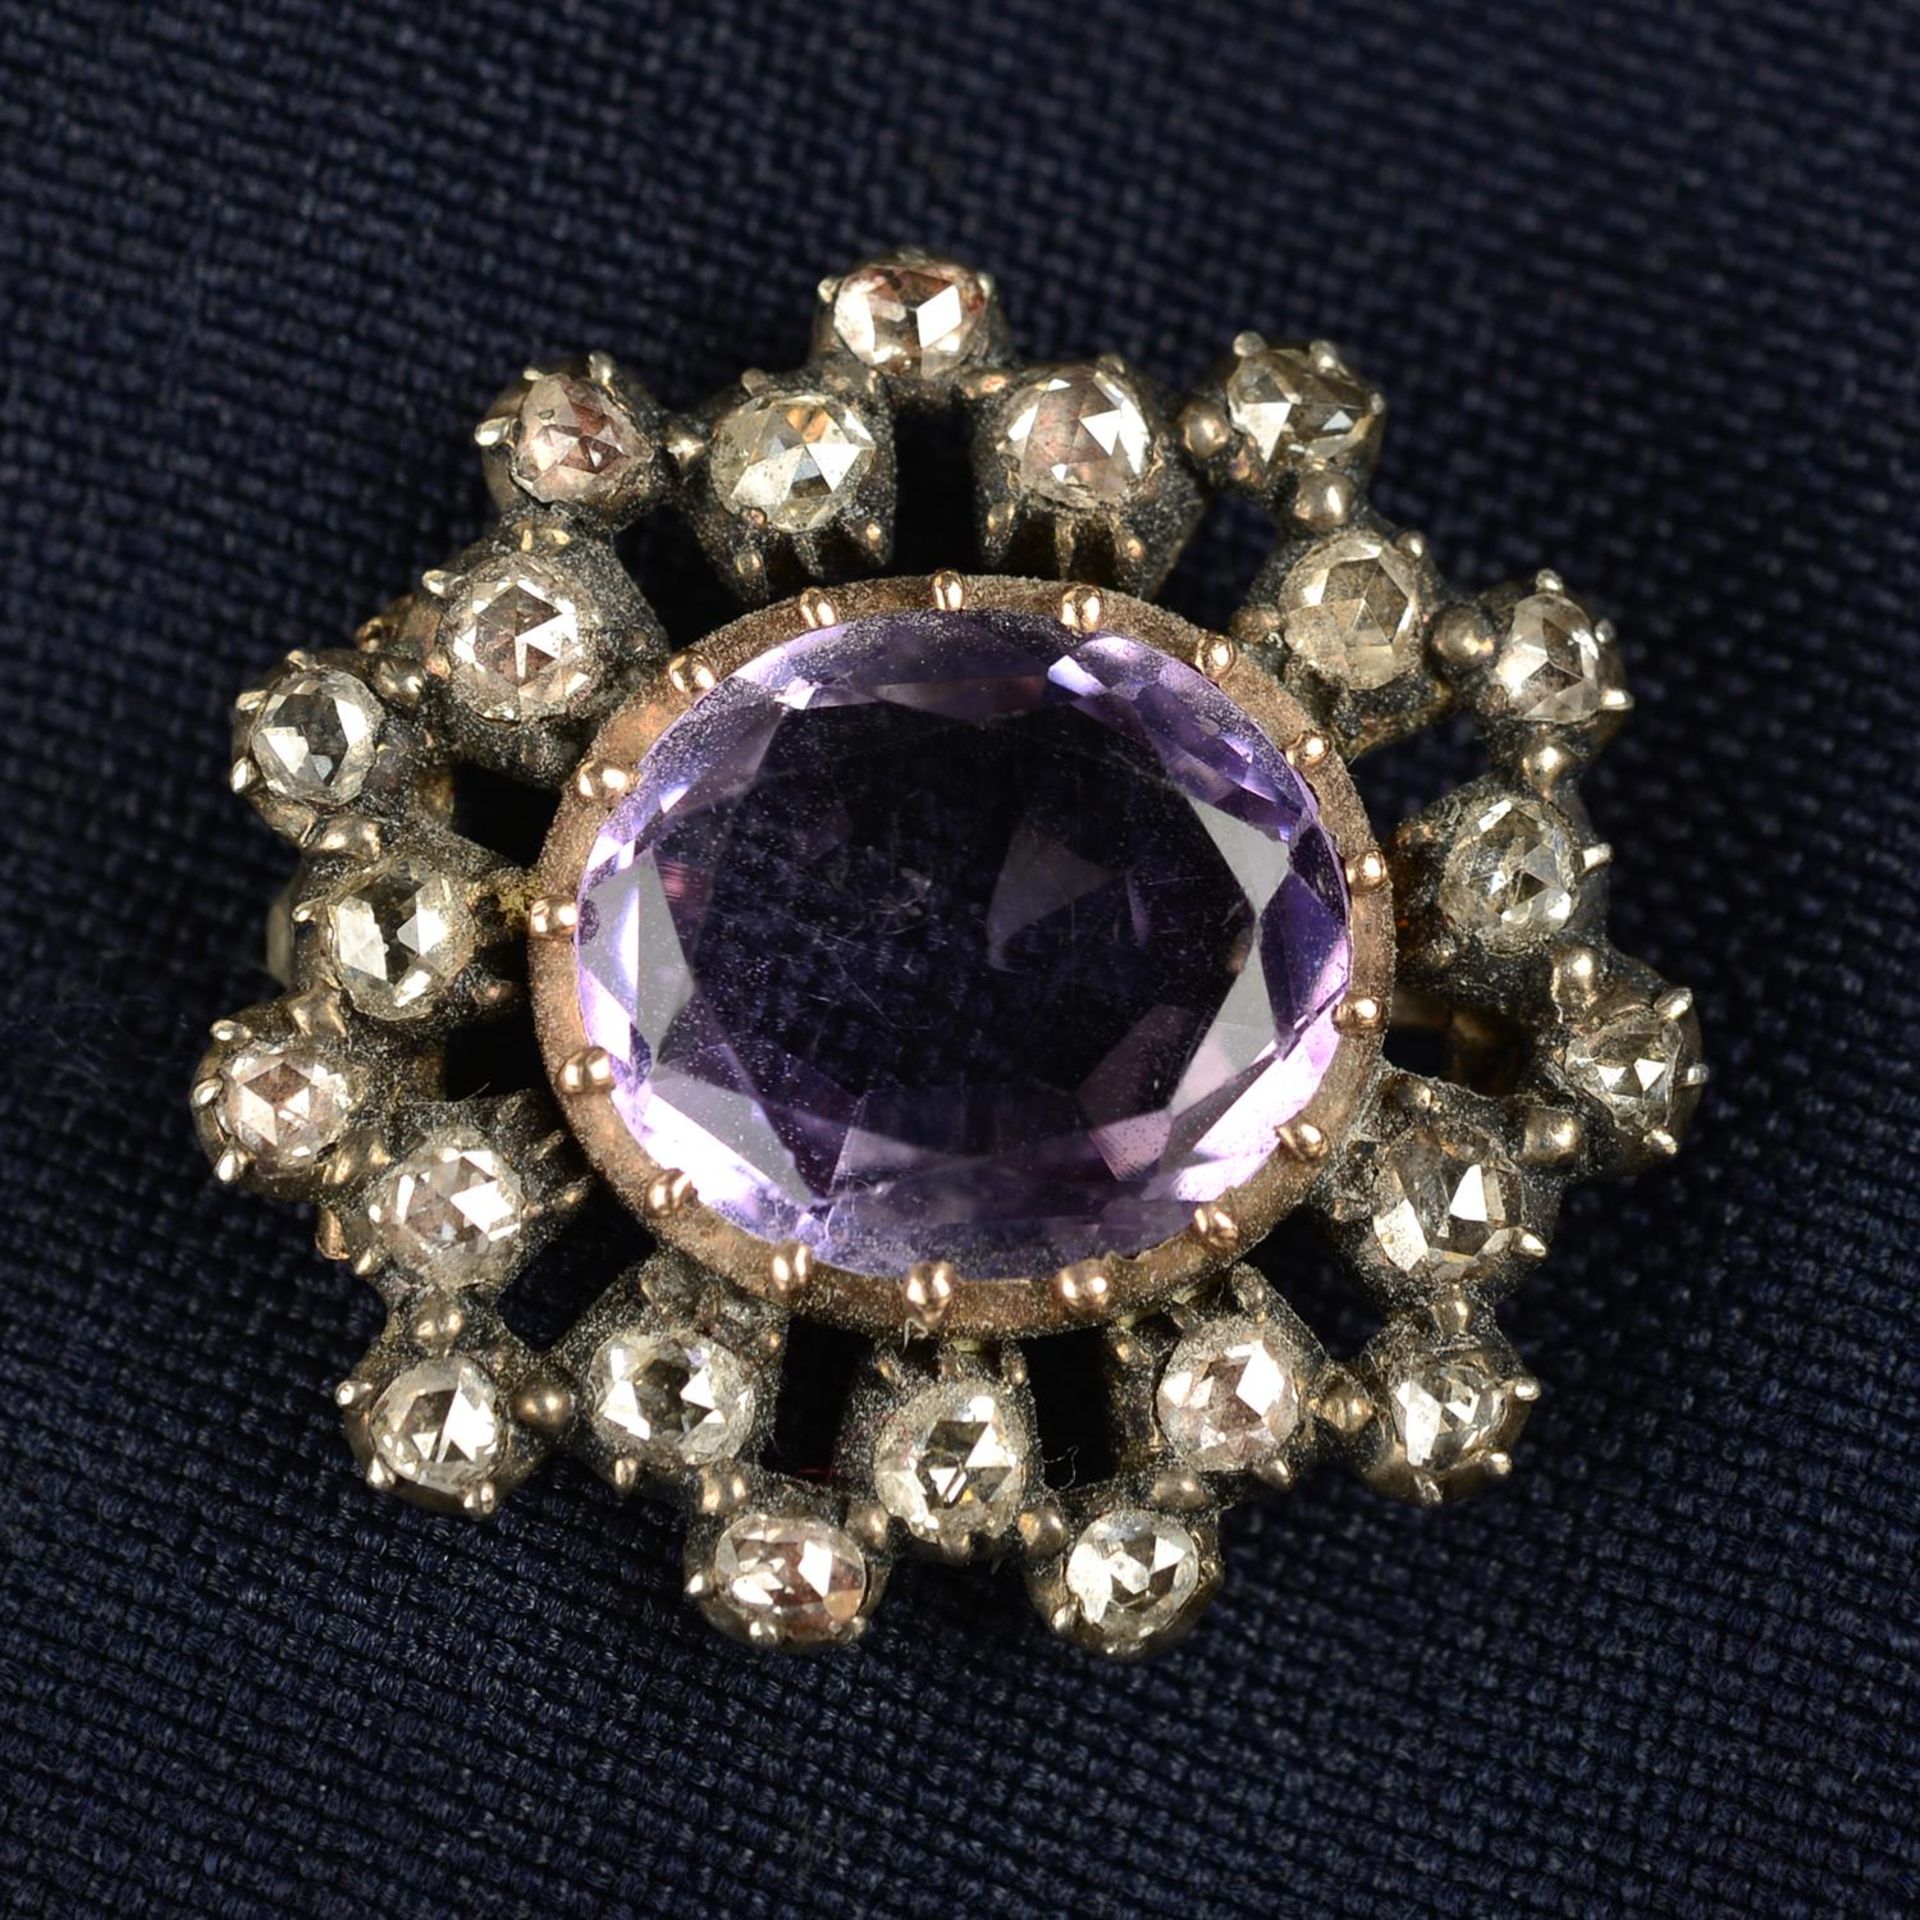 An early to mid 19th century silver and gold amethyst and rose-cut diamond brooch.